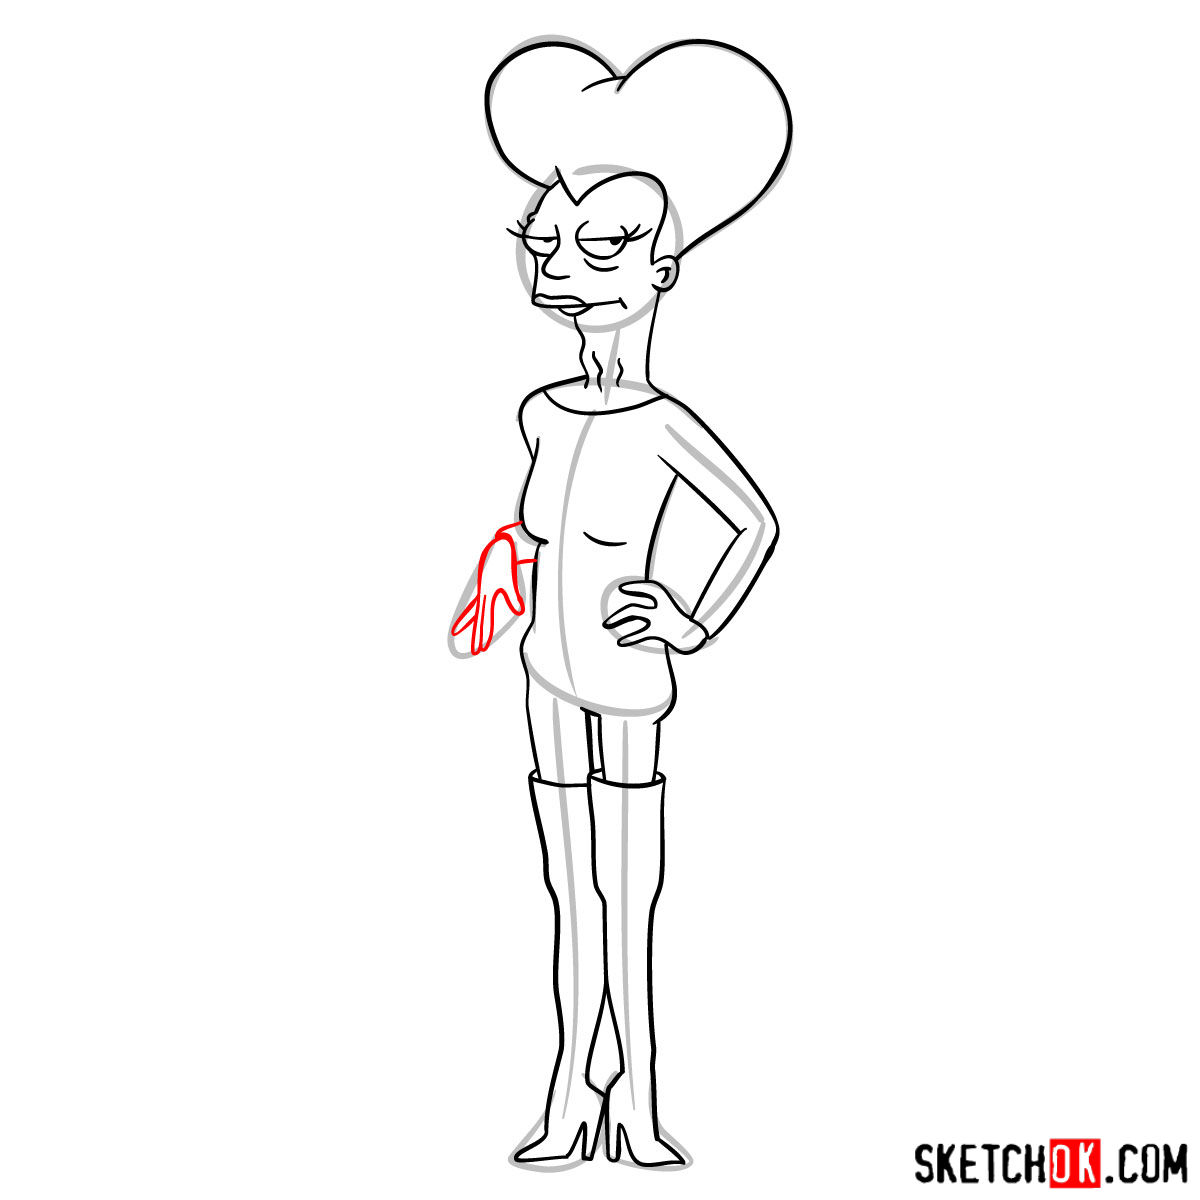 How to draw Mom from Futurama - step 11